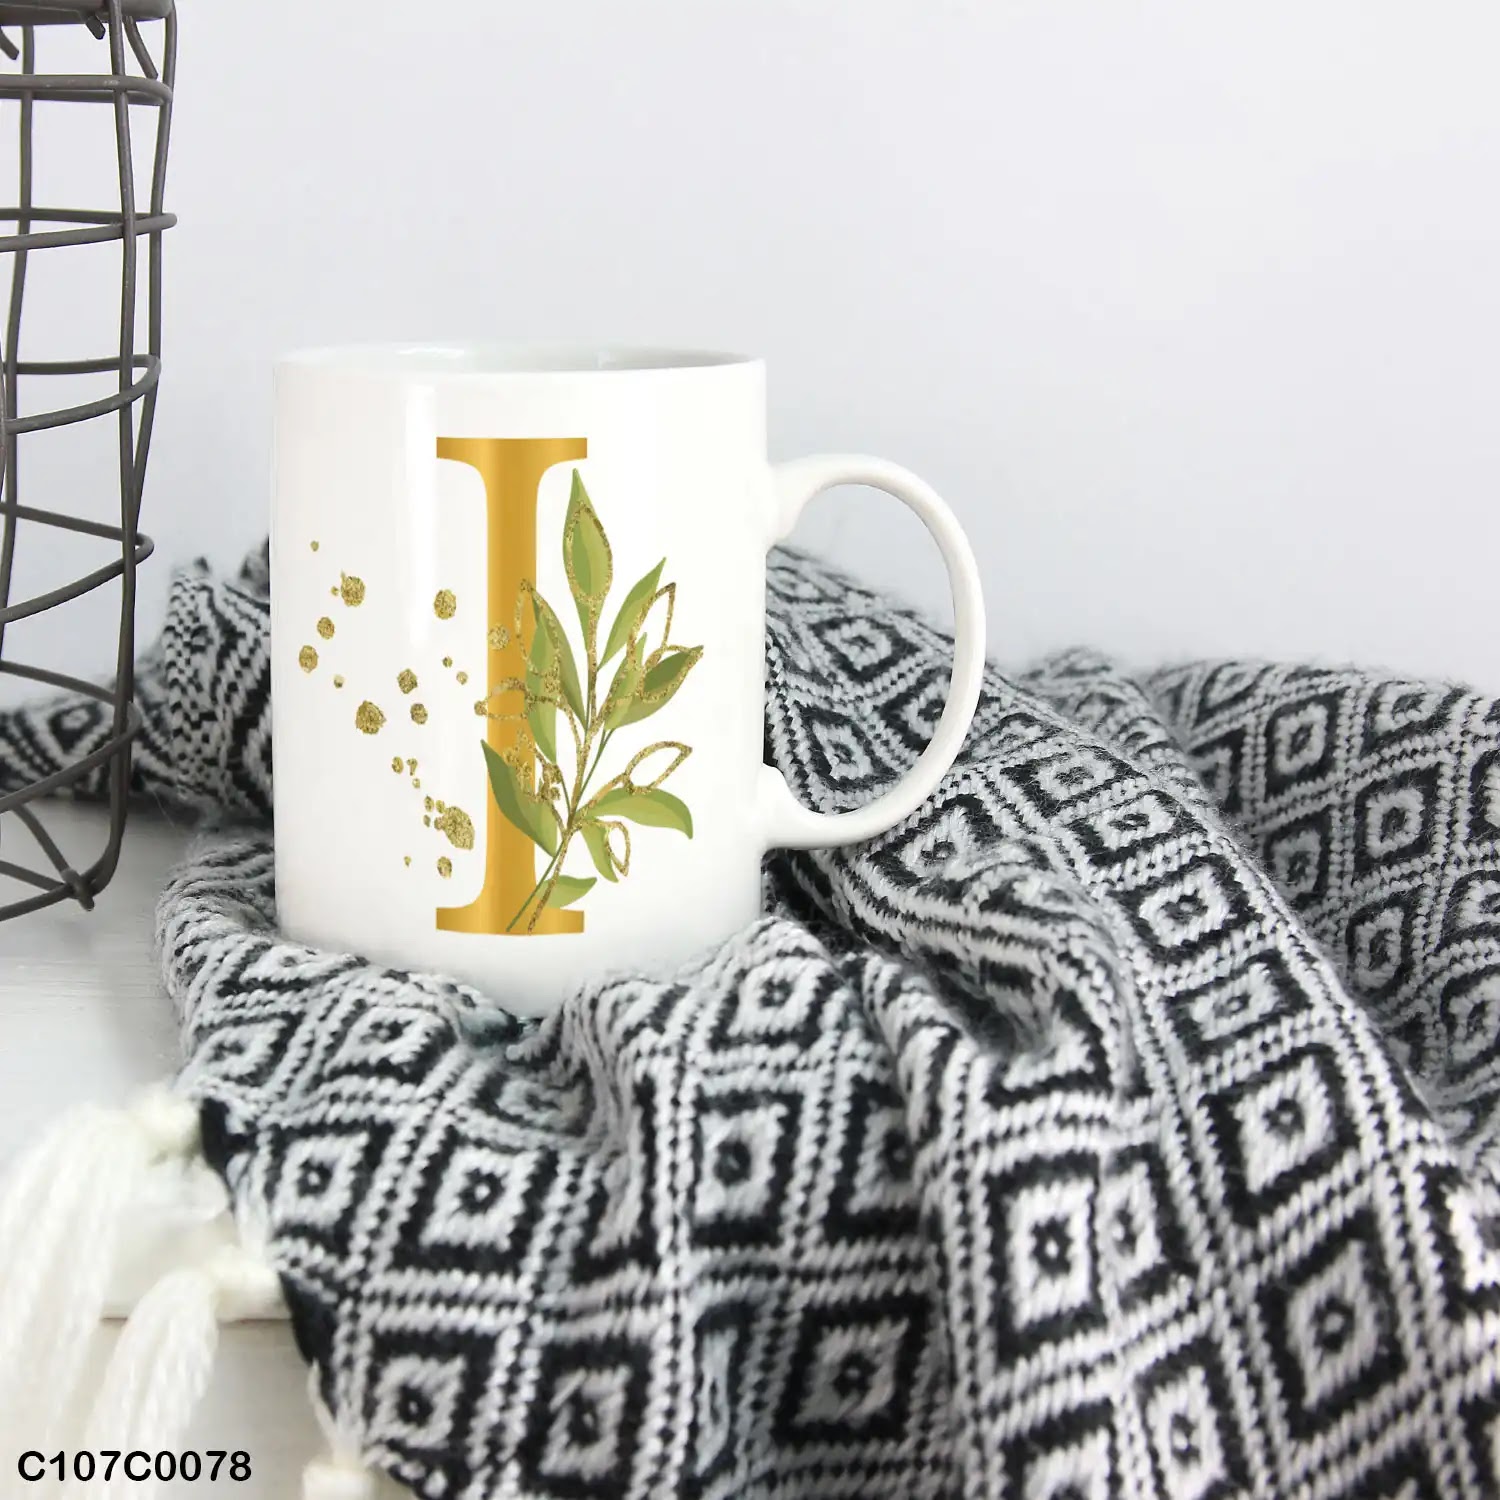 A white mug (cup) printed with gold Letter "I" and small green branch